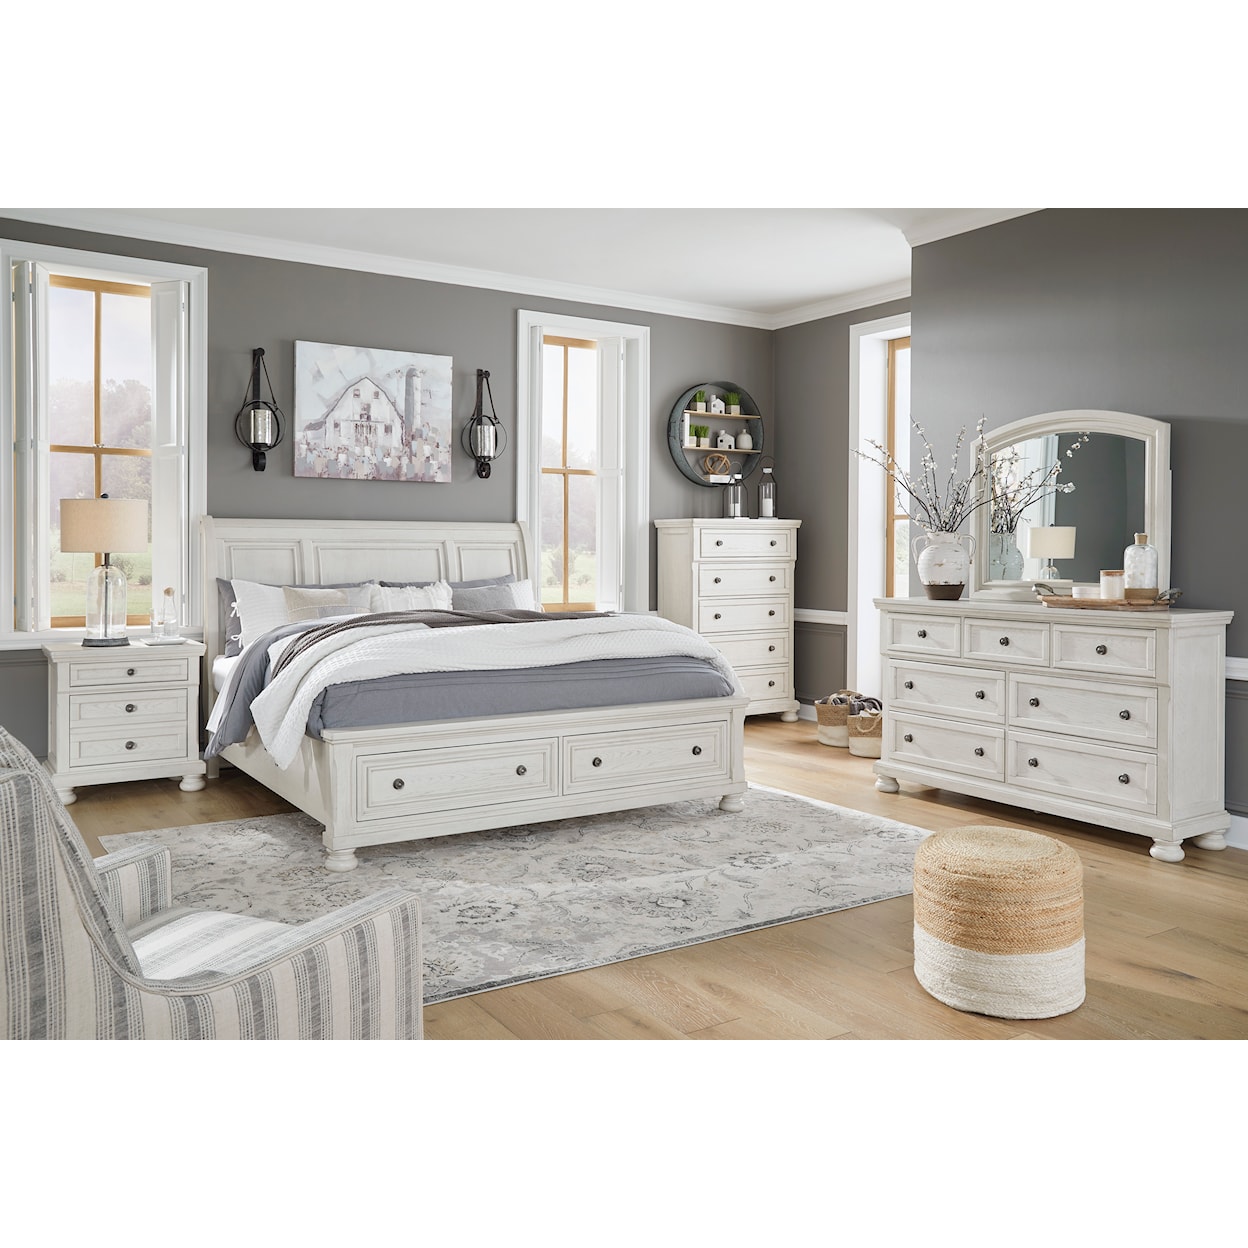 Signature Design by Ashley Robbinsdale King Bedroom Group